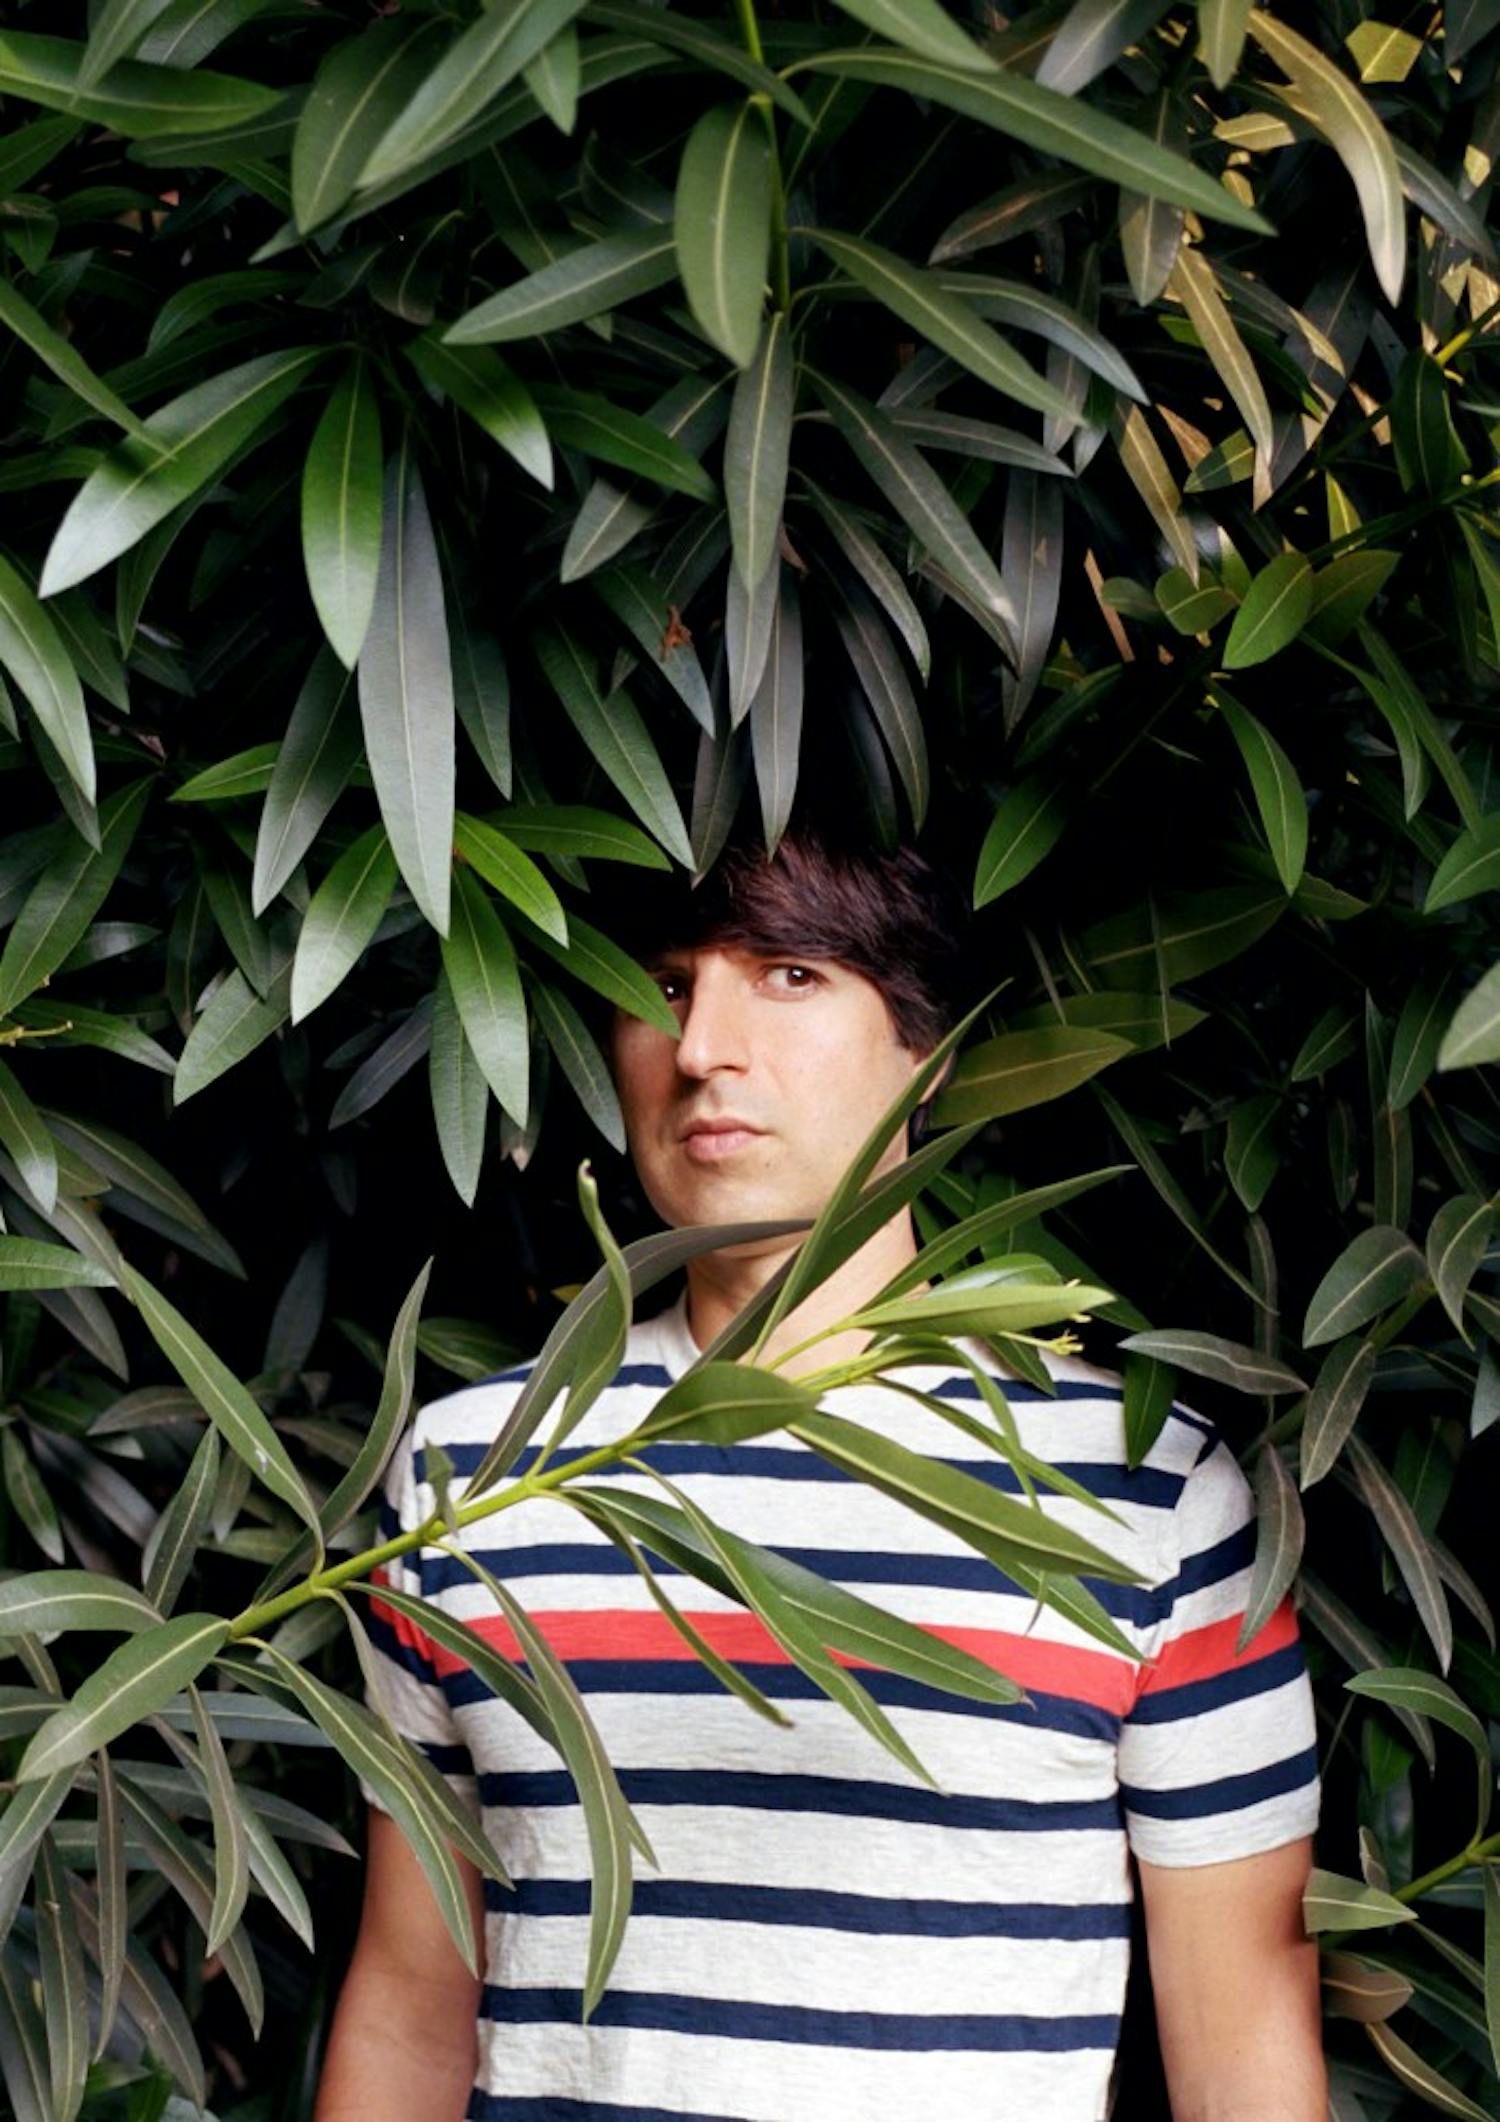 Comedian Demetri Martin cracked jokes and made music on-stage at the Center for the Arts on Saturday. Martin, alongside opener Erin Harkes, performed as part of the latest stop on the "Let's Get Awkward" tour.